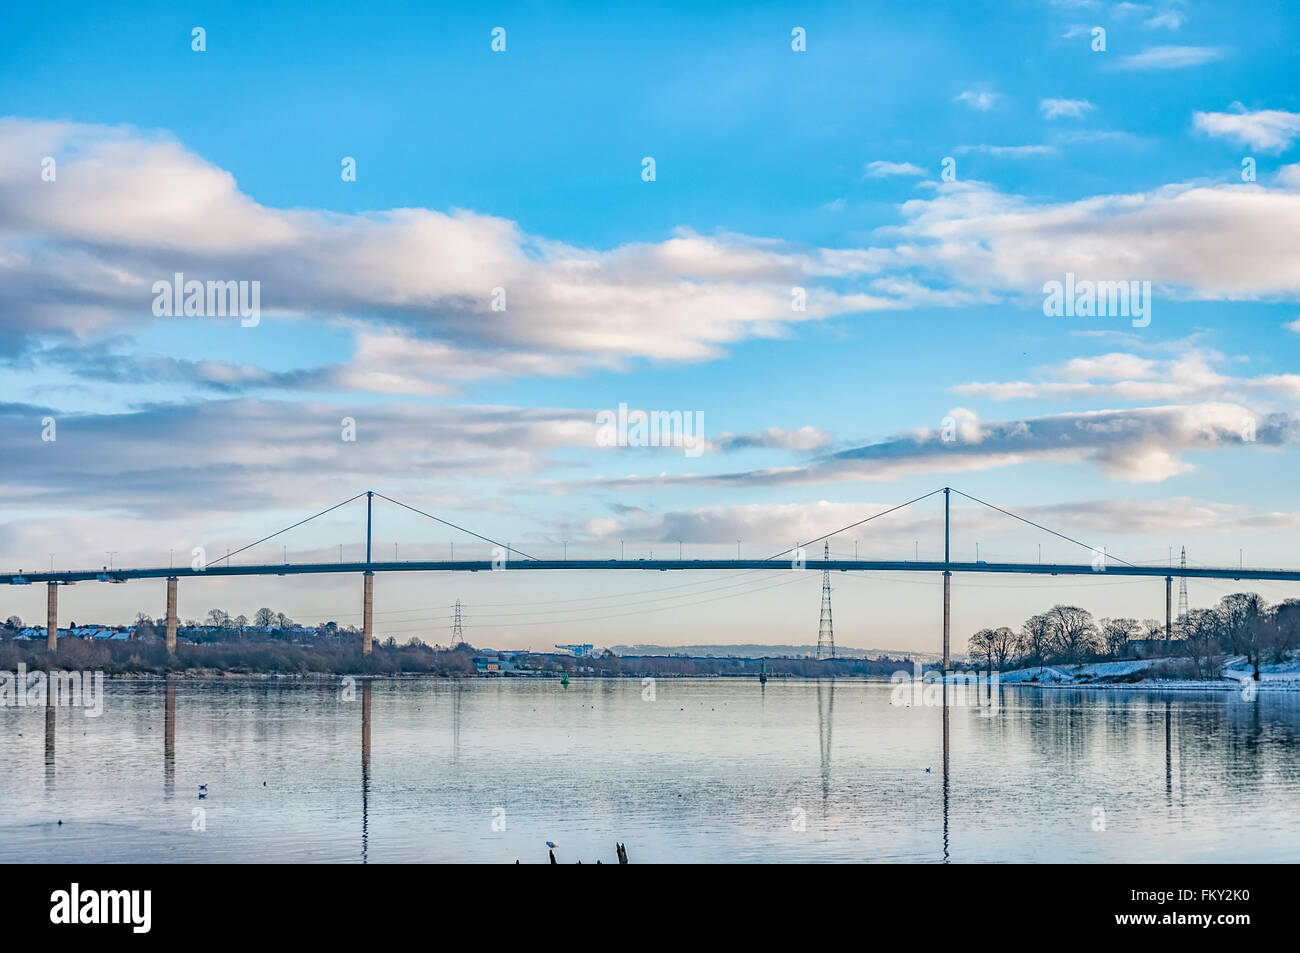 Erskine bridge spanning the river clyde in Scotland Stock Photo